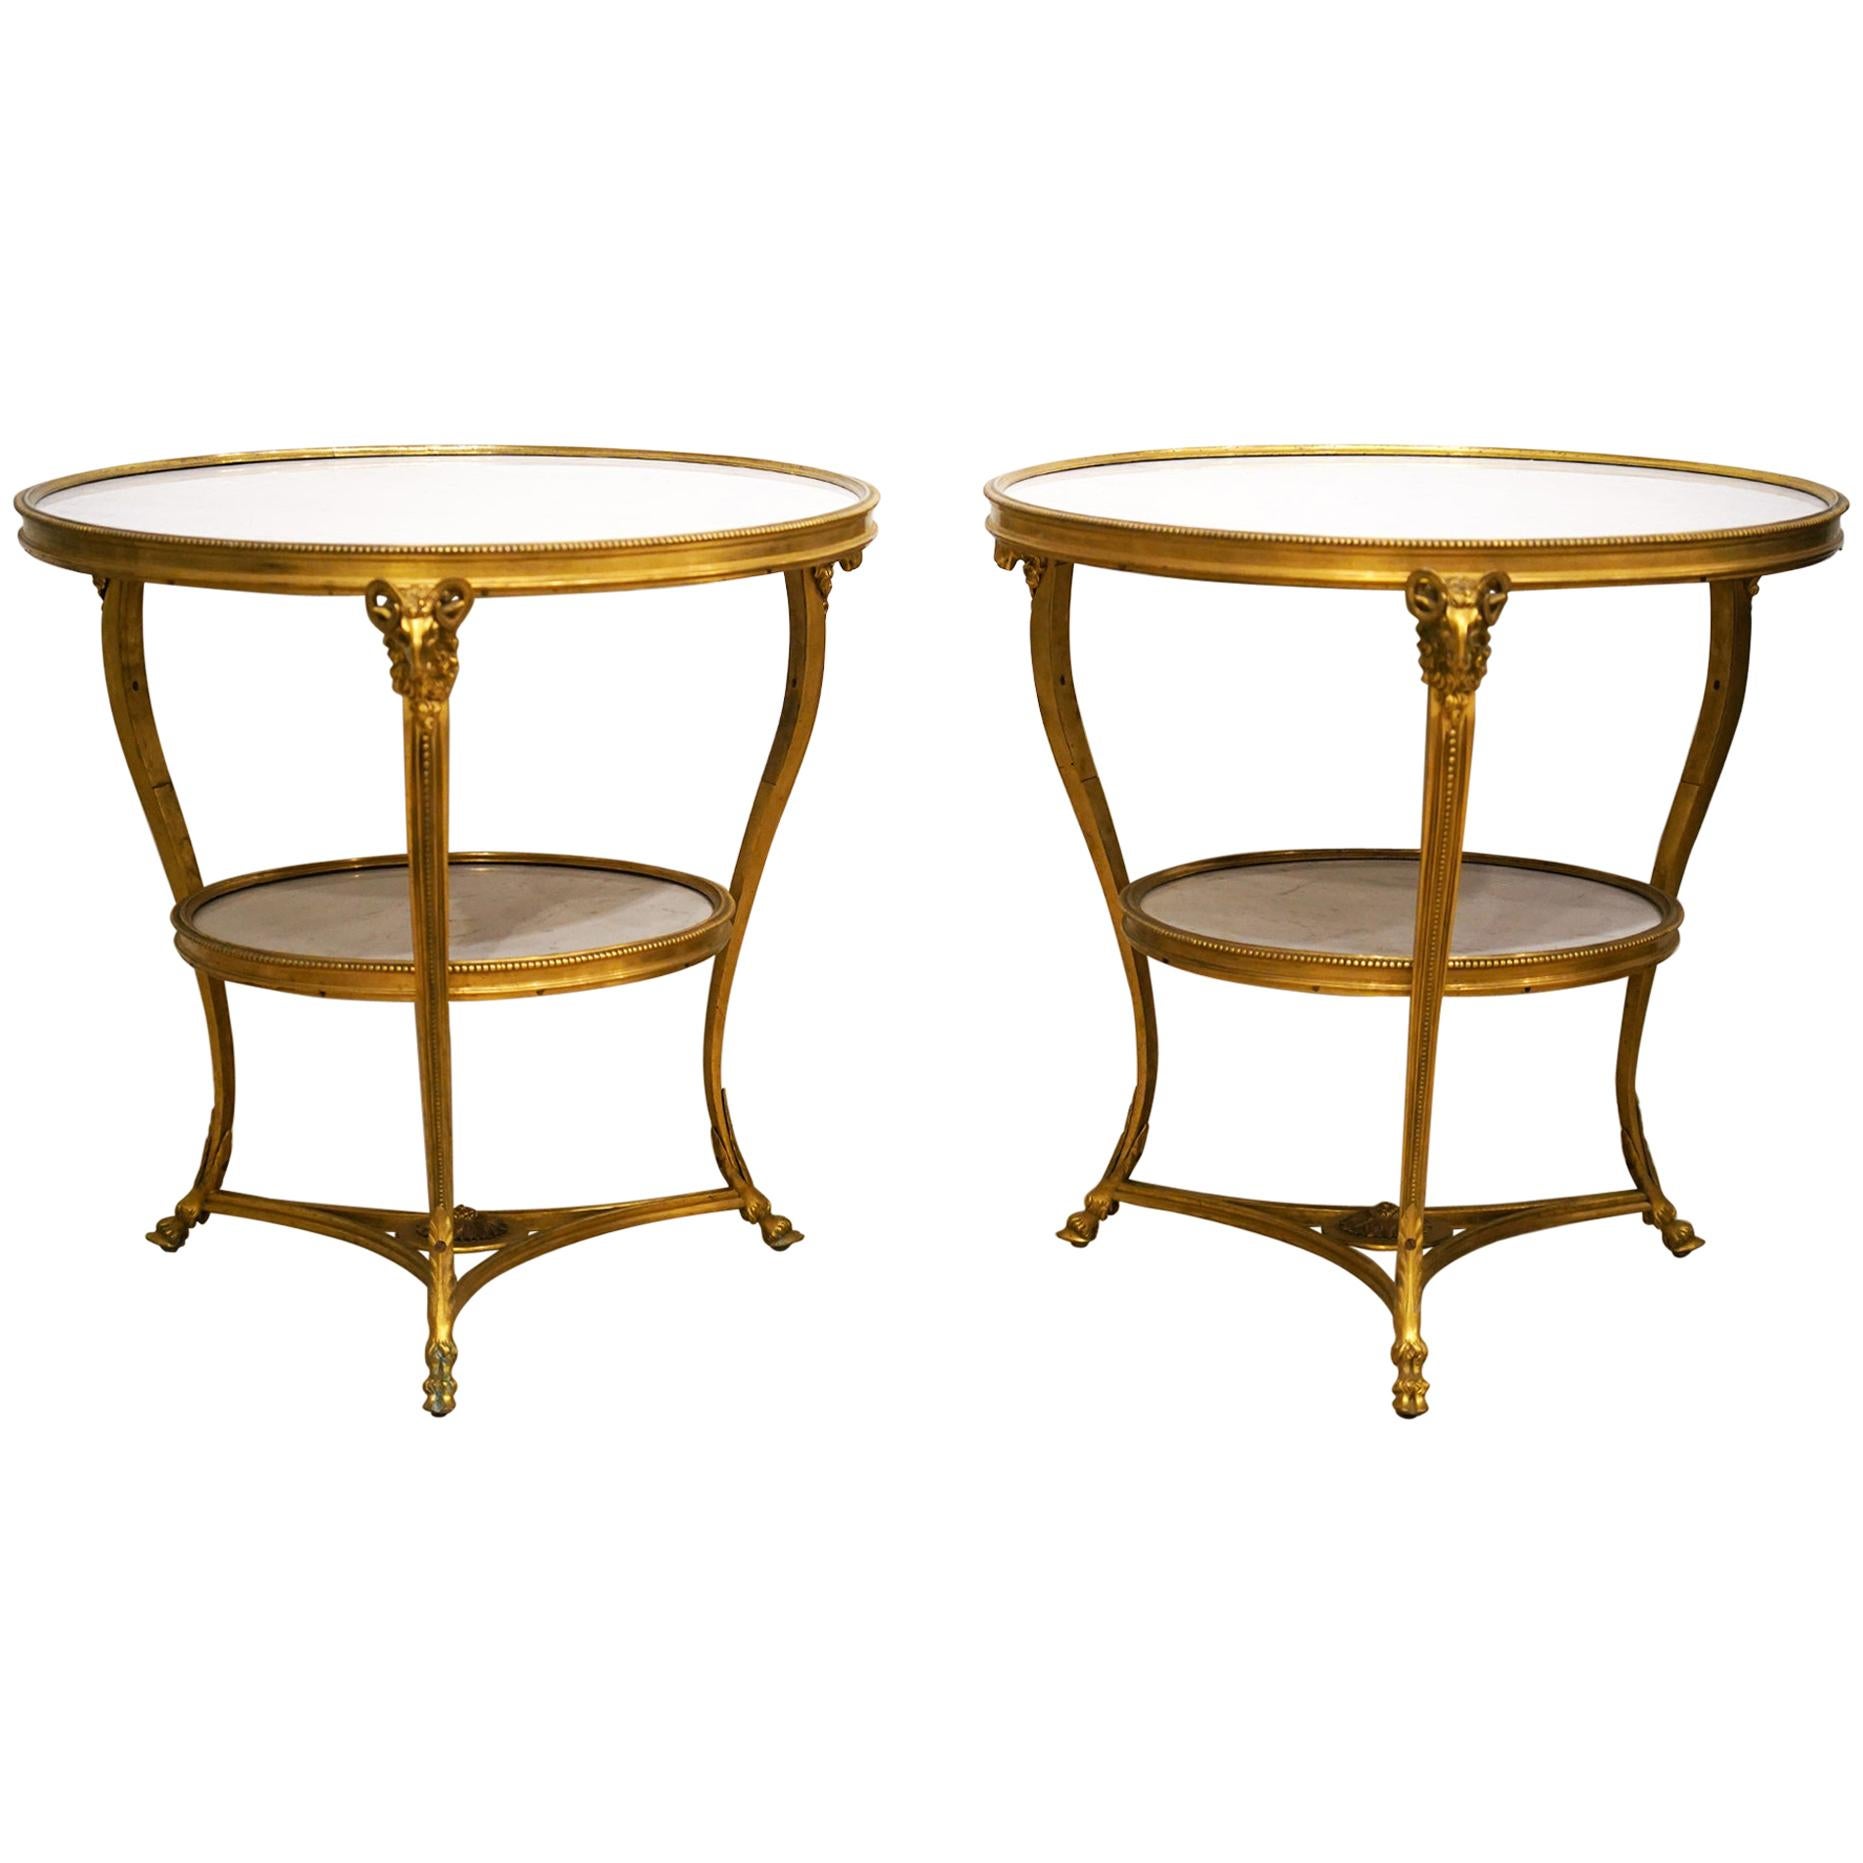 French Louis XV Style Gilt Bronze Marble-Top Guéridon Tables, 19th Century, Pair